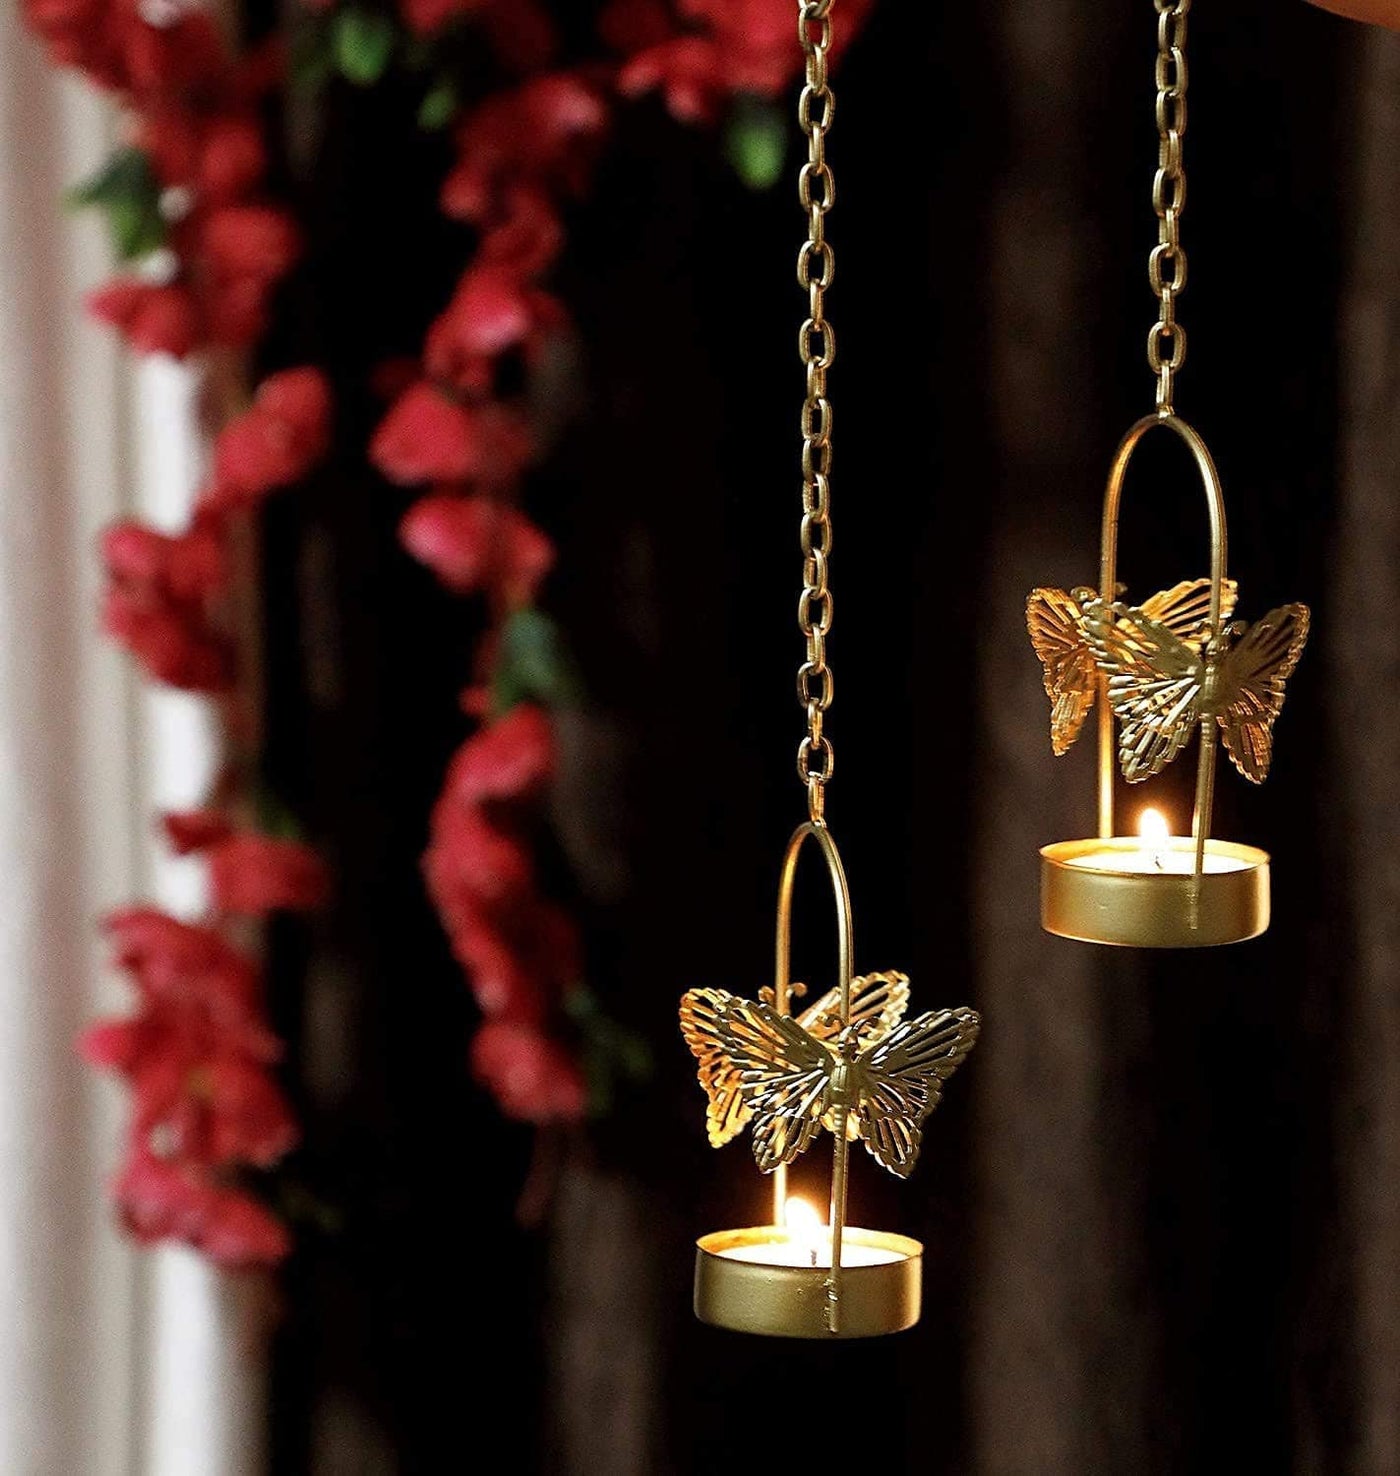 LAMANSH butterfly candle holders LAMANSH® Festive Decorative Hanging Metal Butterfly Tealight Candle Holder for Home Decor with Chain Hangs for Diwali, Christmas Home and Party Decorations